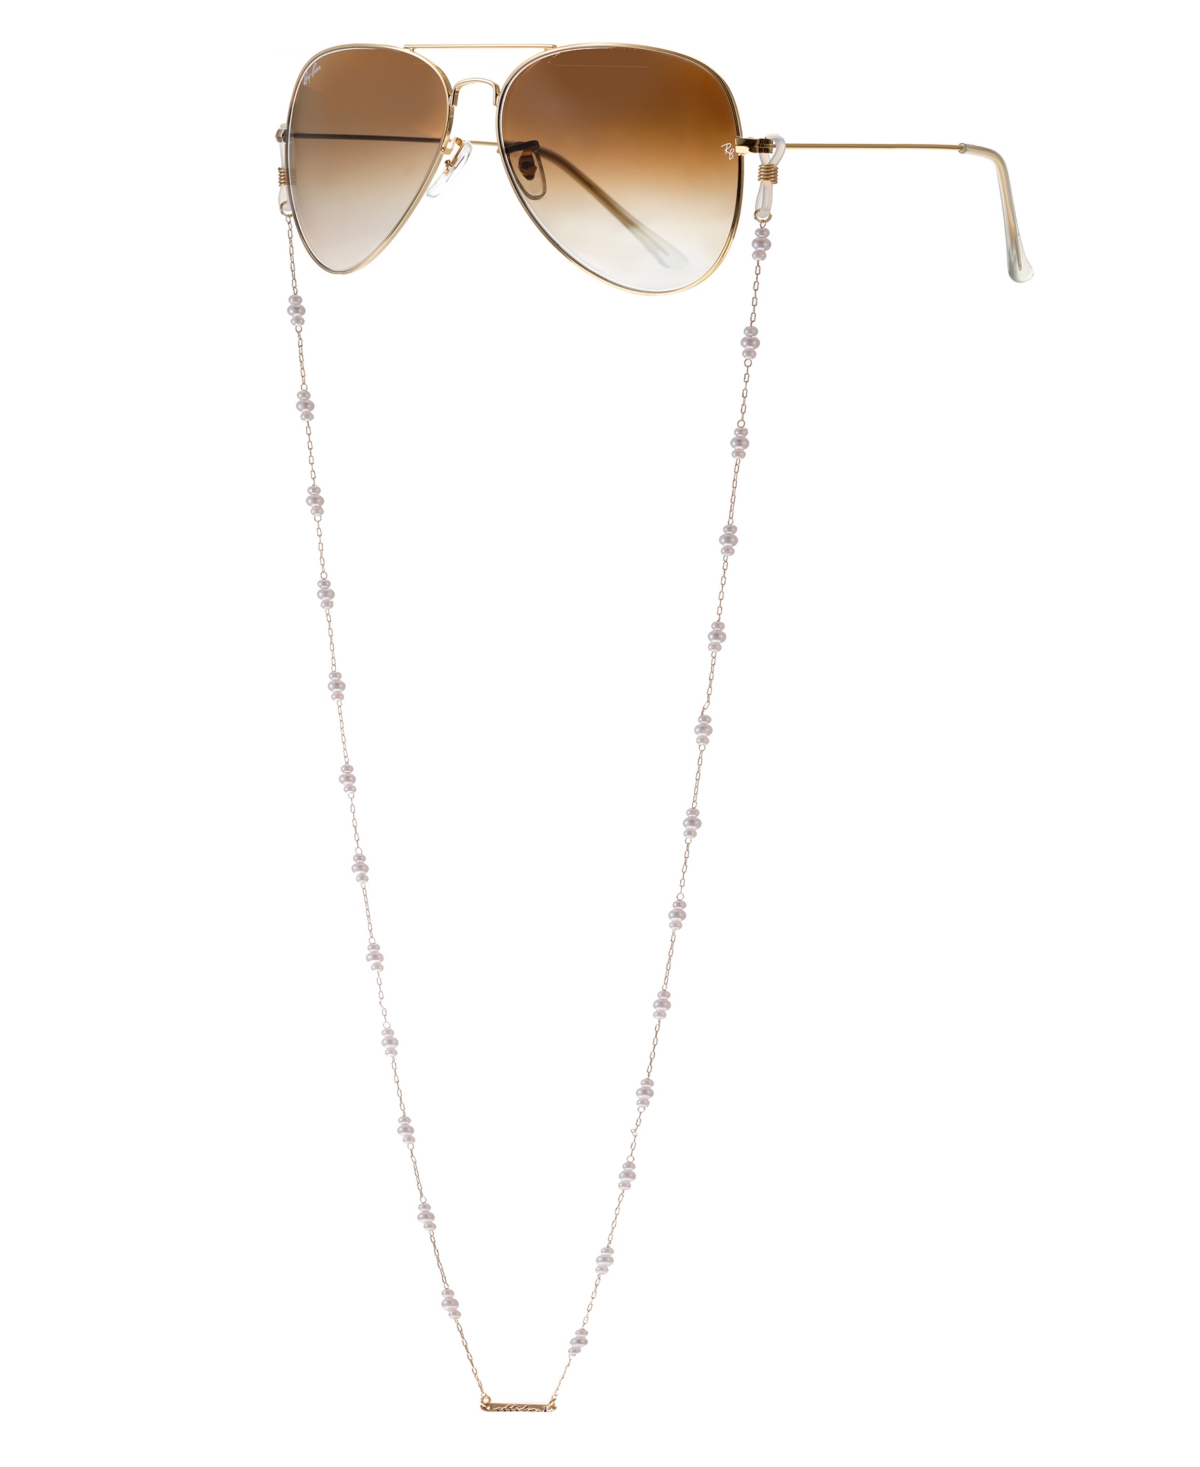 Women's 18k Gold Plated Imitation Pearl Moments Glasses Chain - Gold-Plated